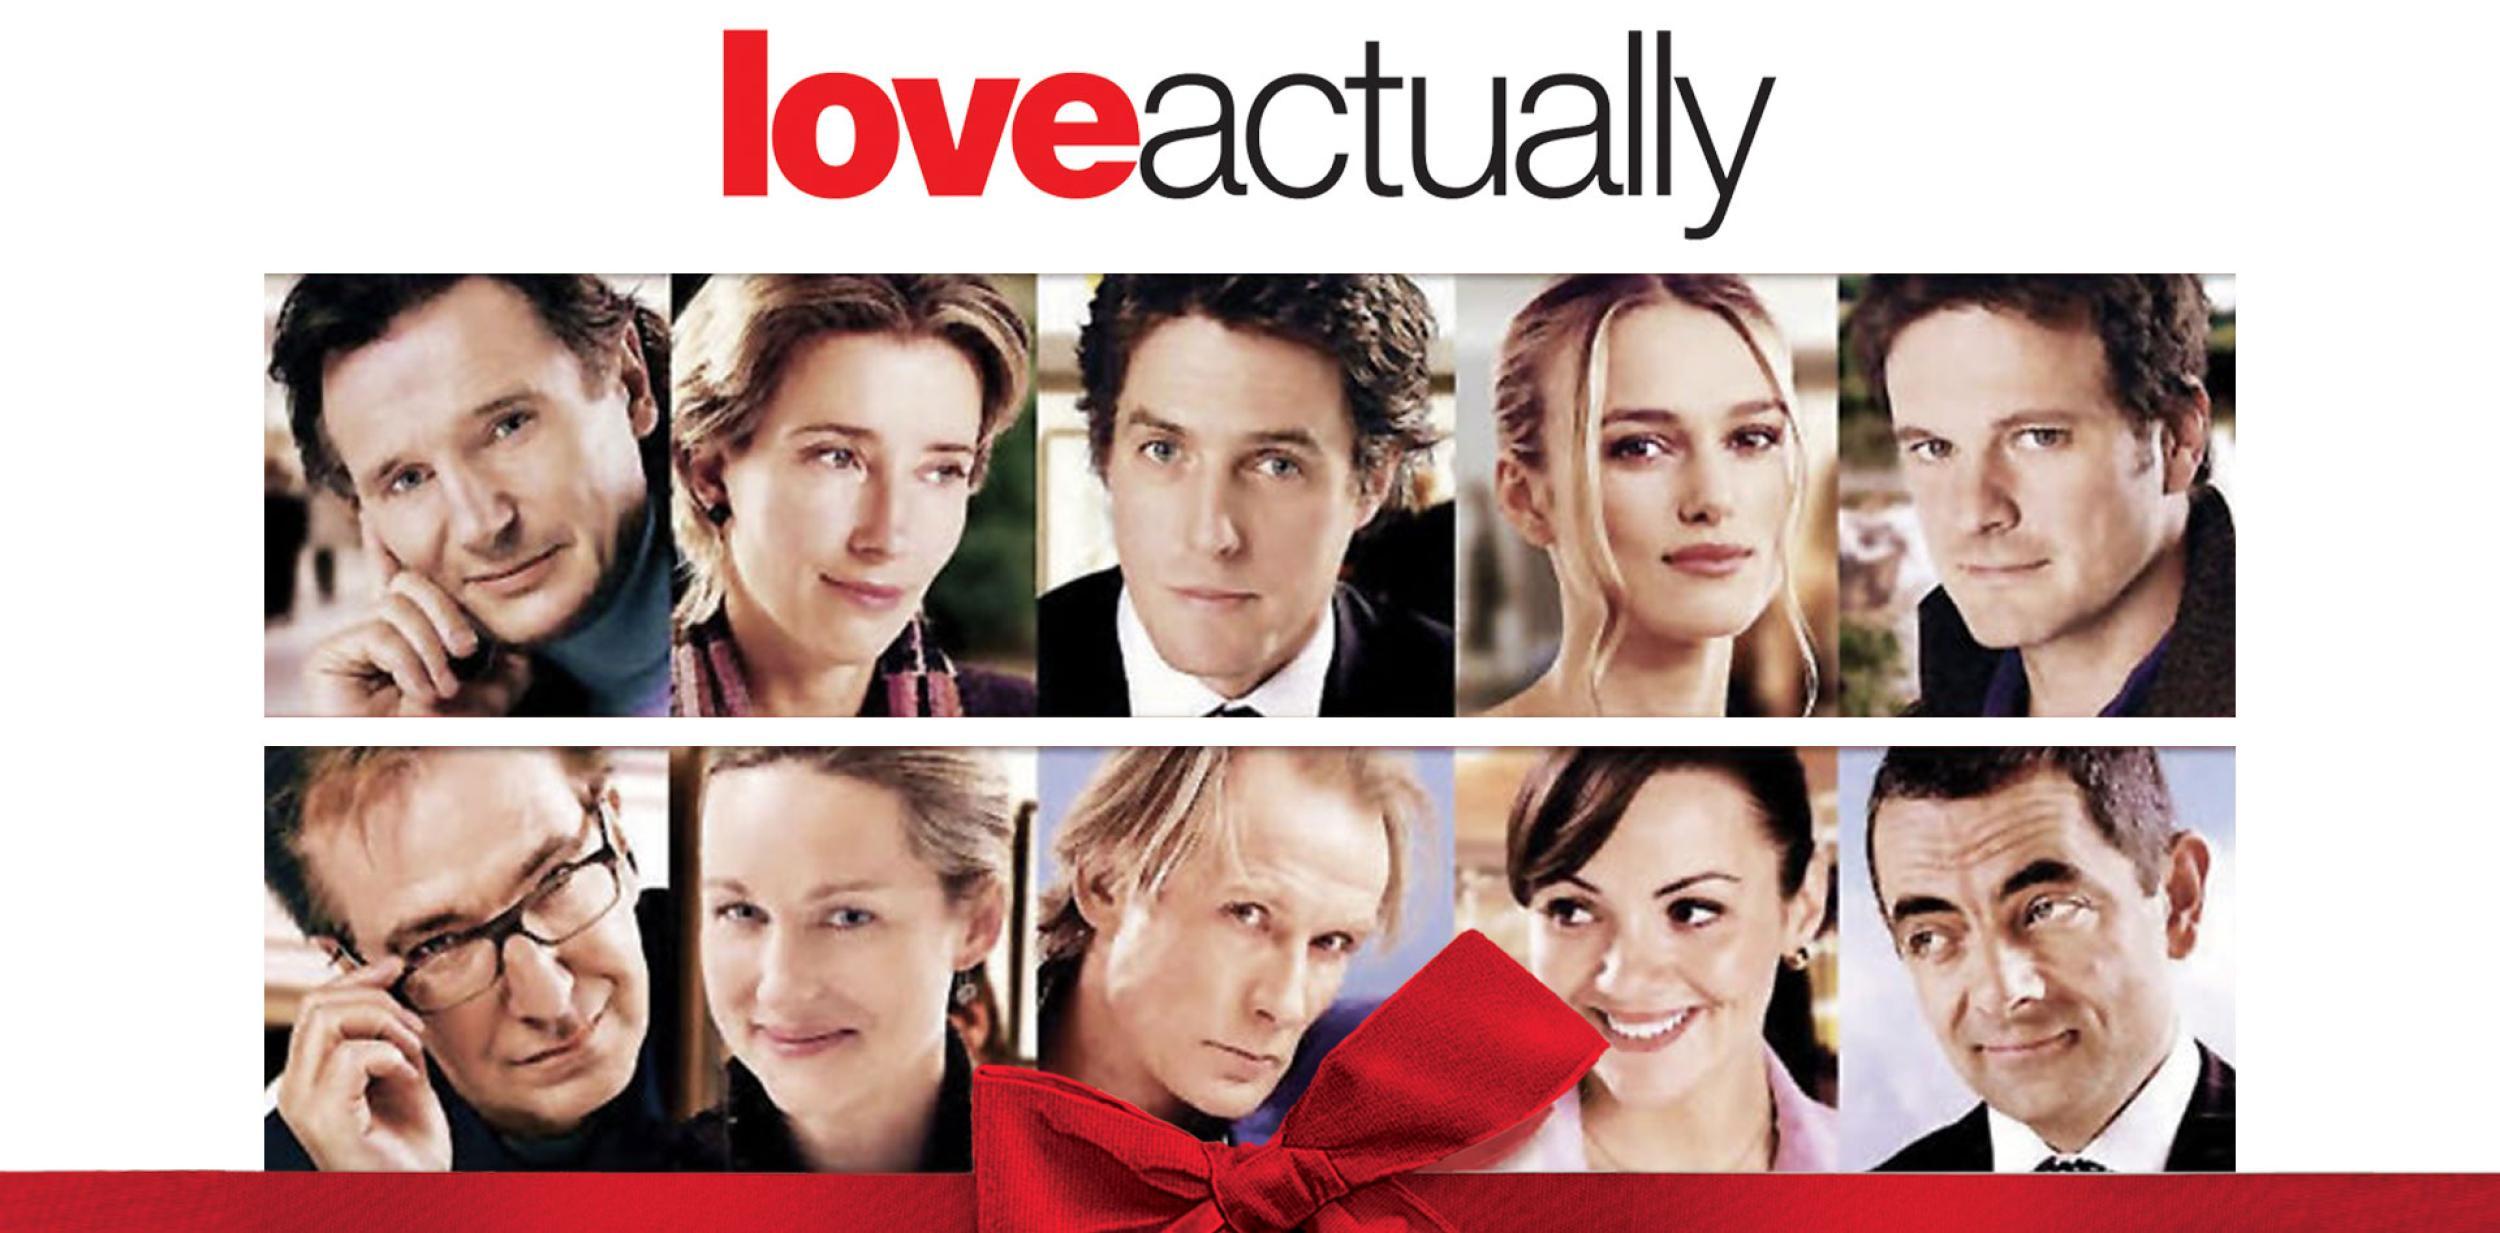 Poster of the film Love Actually featuring the faces of each character